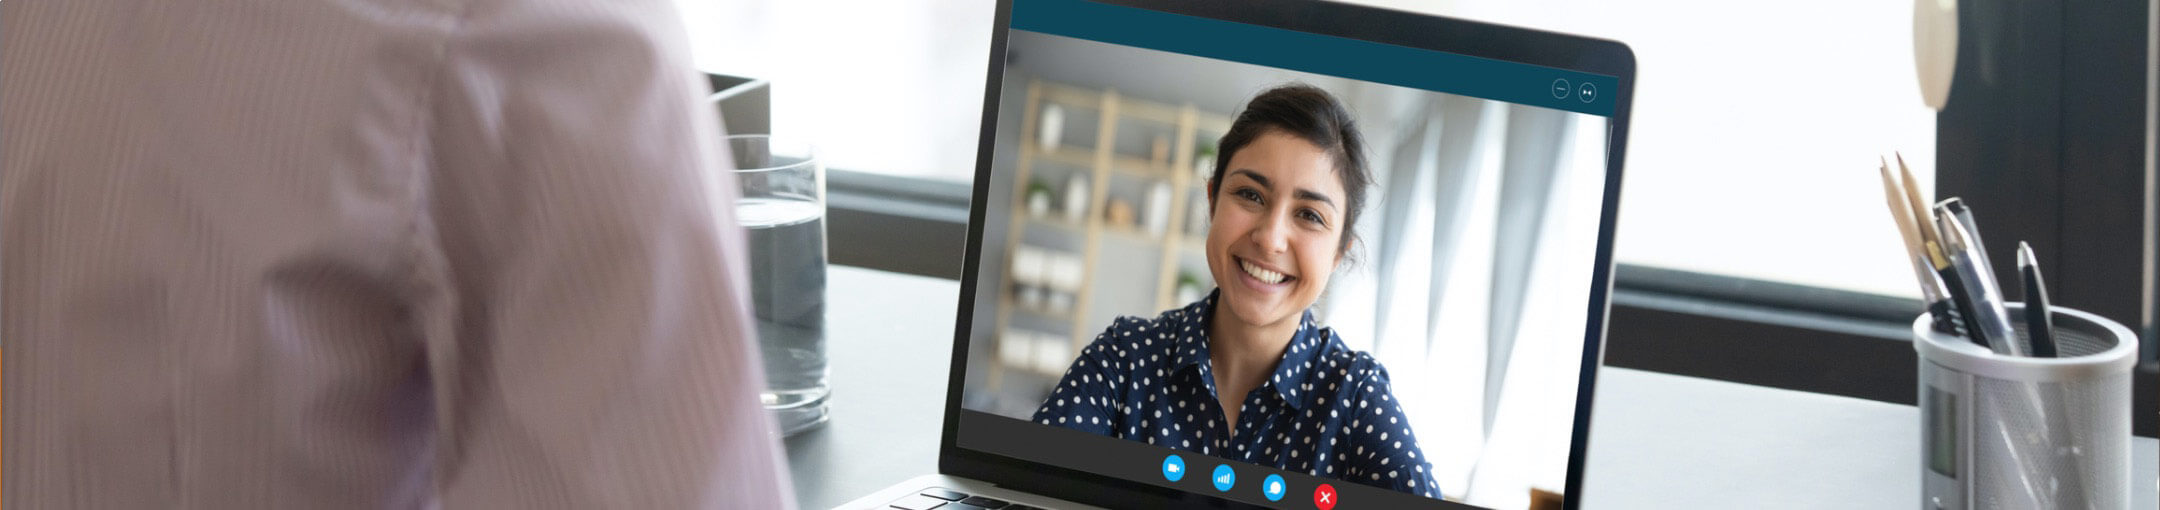 A person looking at a screen displaying the video feed of another person during a Skype video call.